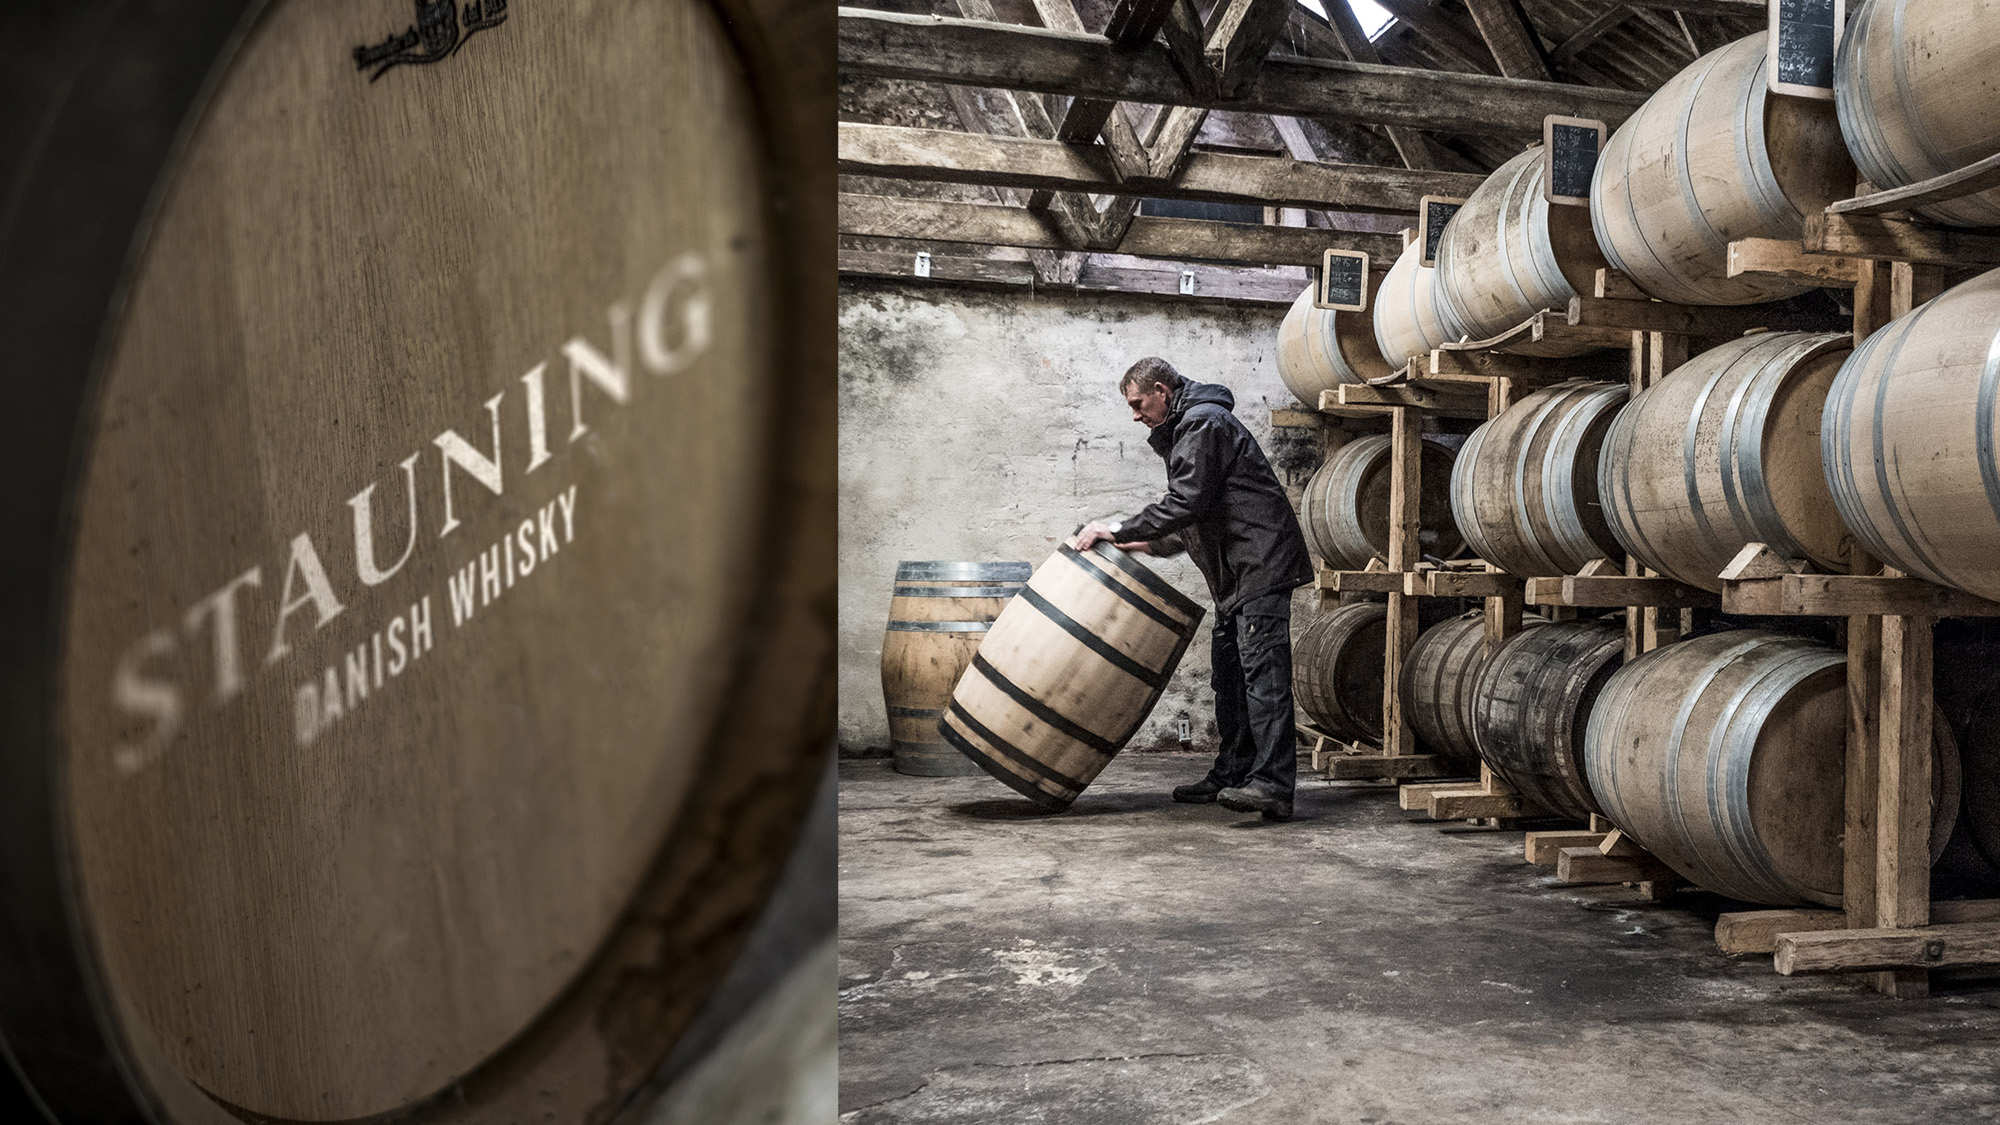 Stauning Whisky appoints Mangrove as UK distributor